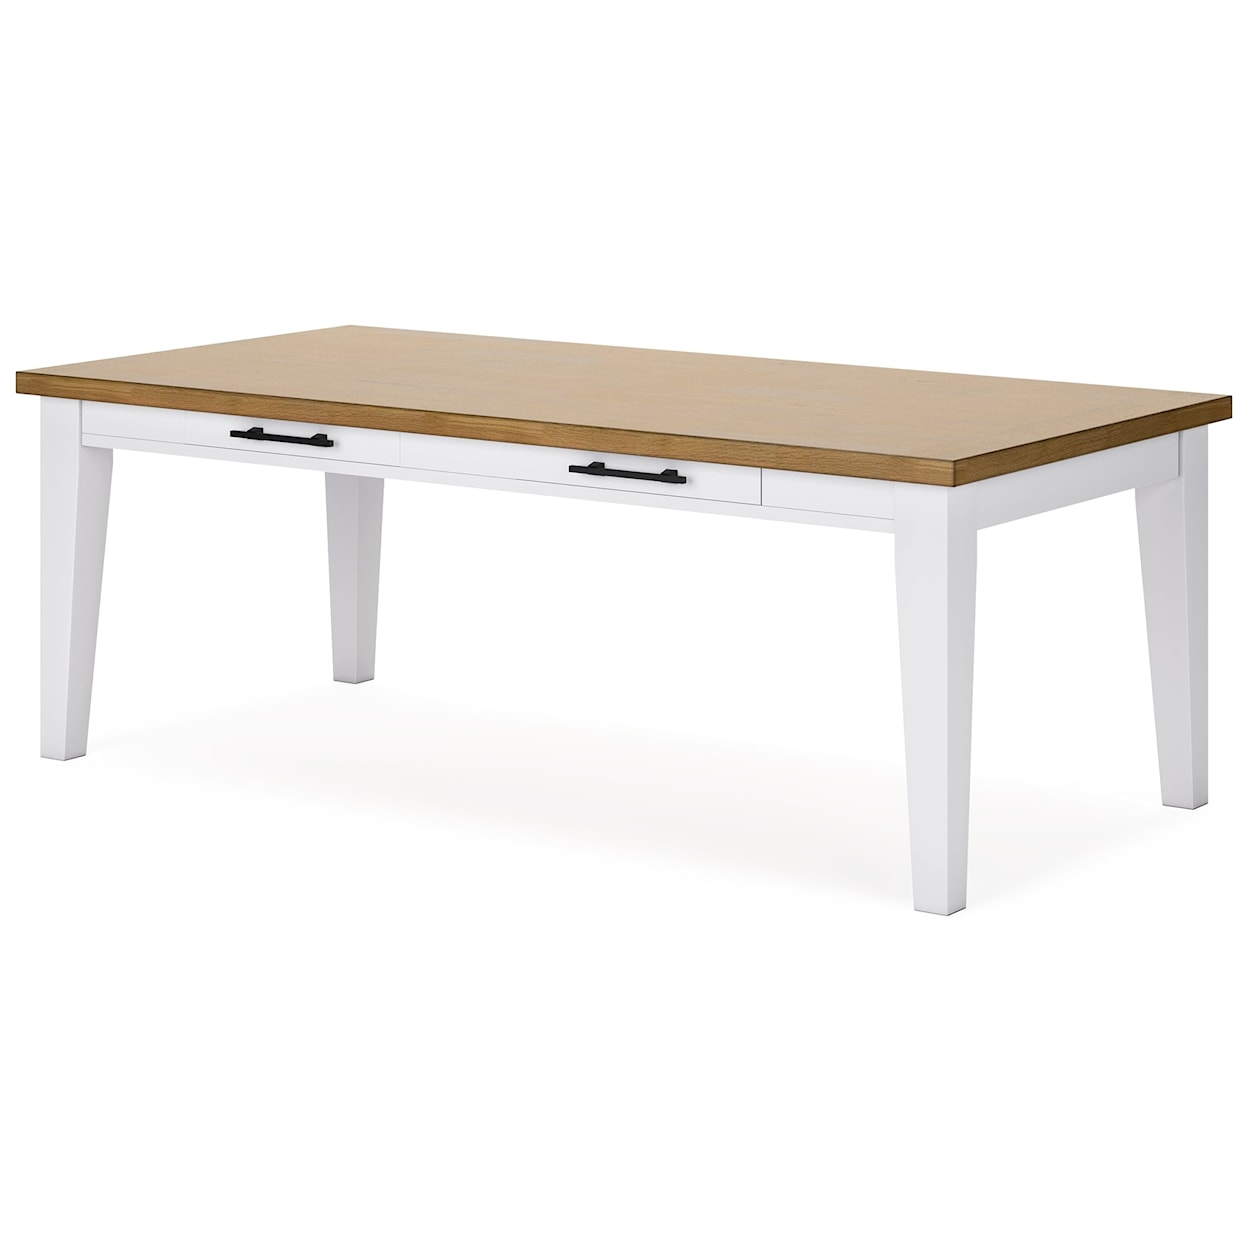 Signature Design by Ashley Furniture Ashbryn Rectangular Dining Room Table